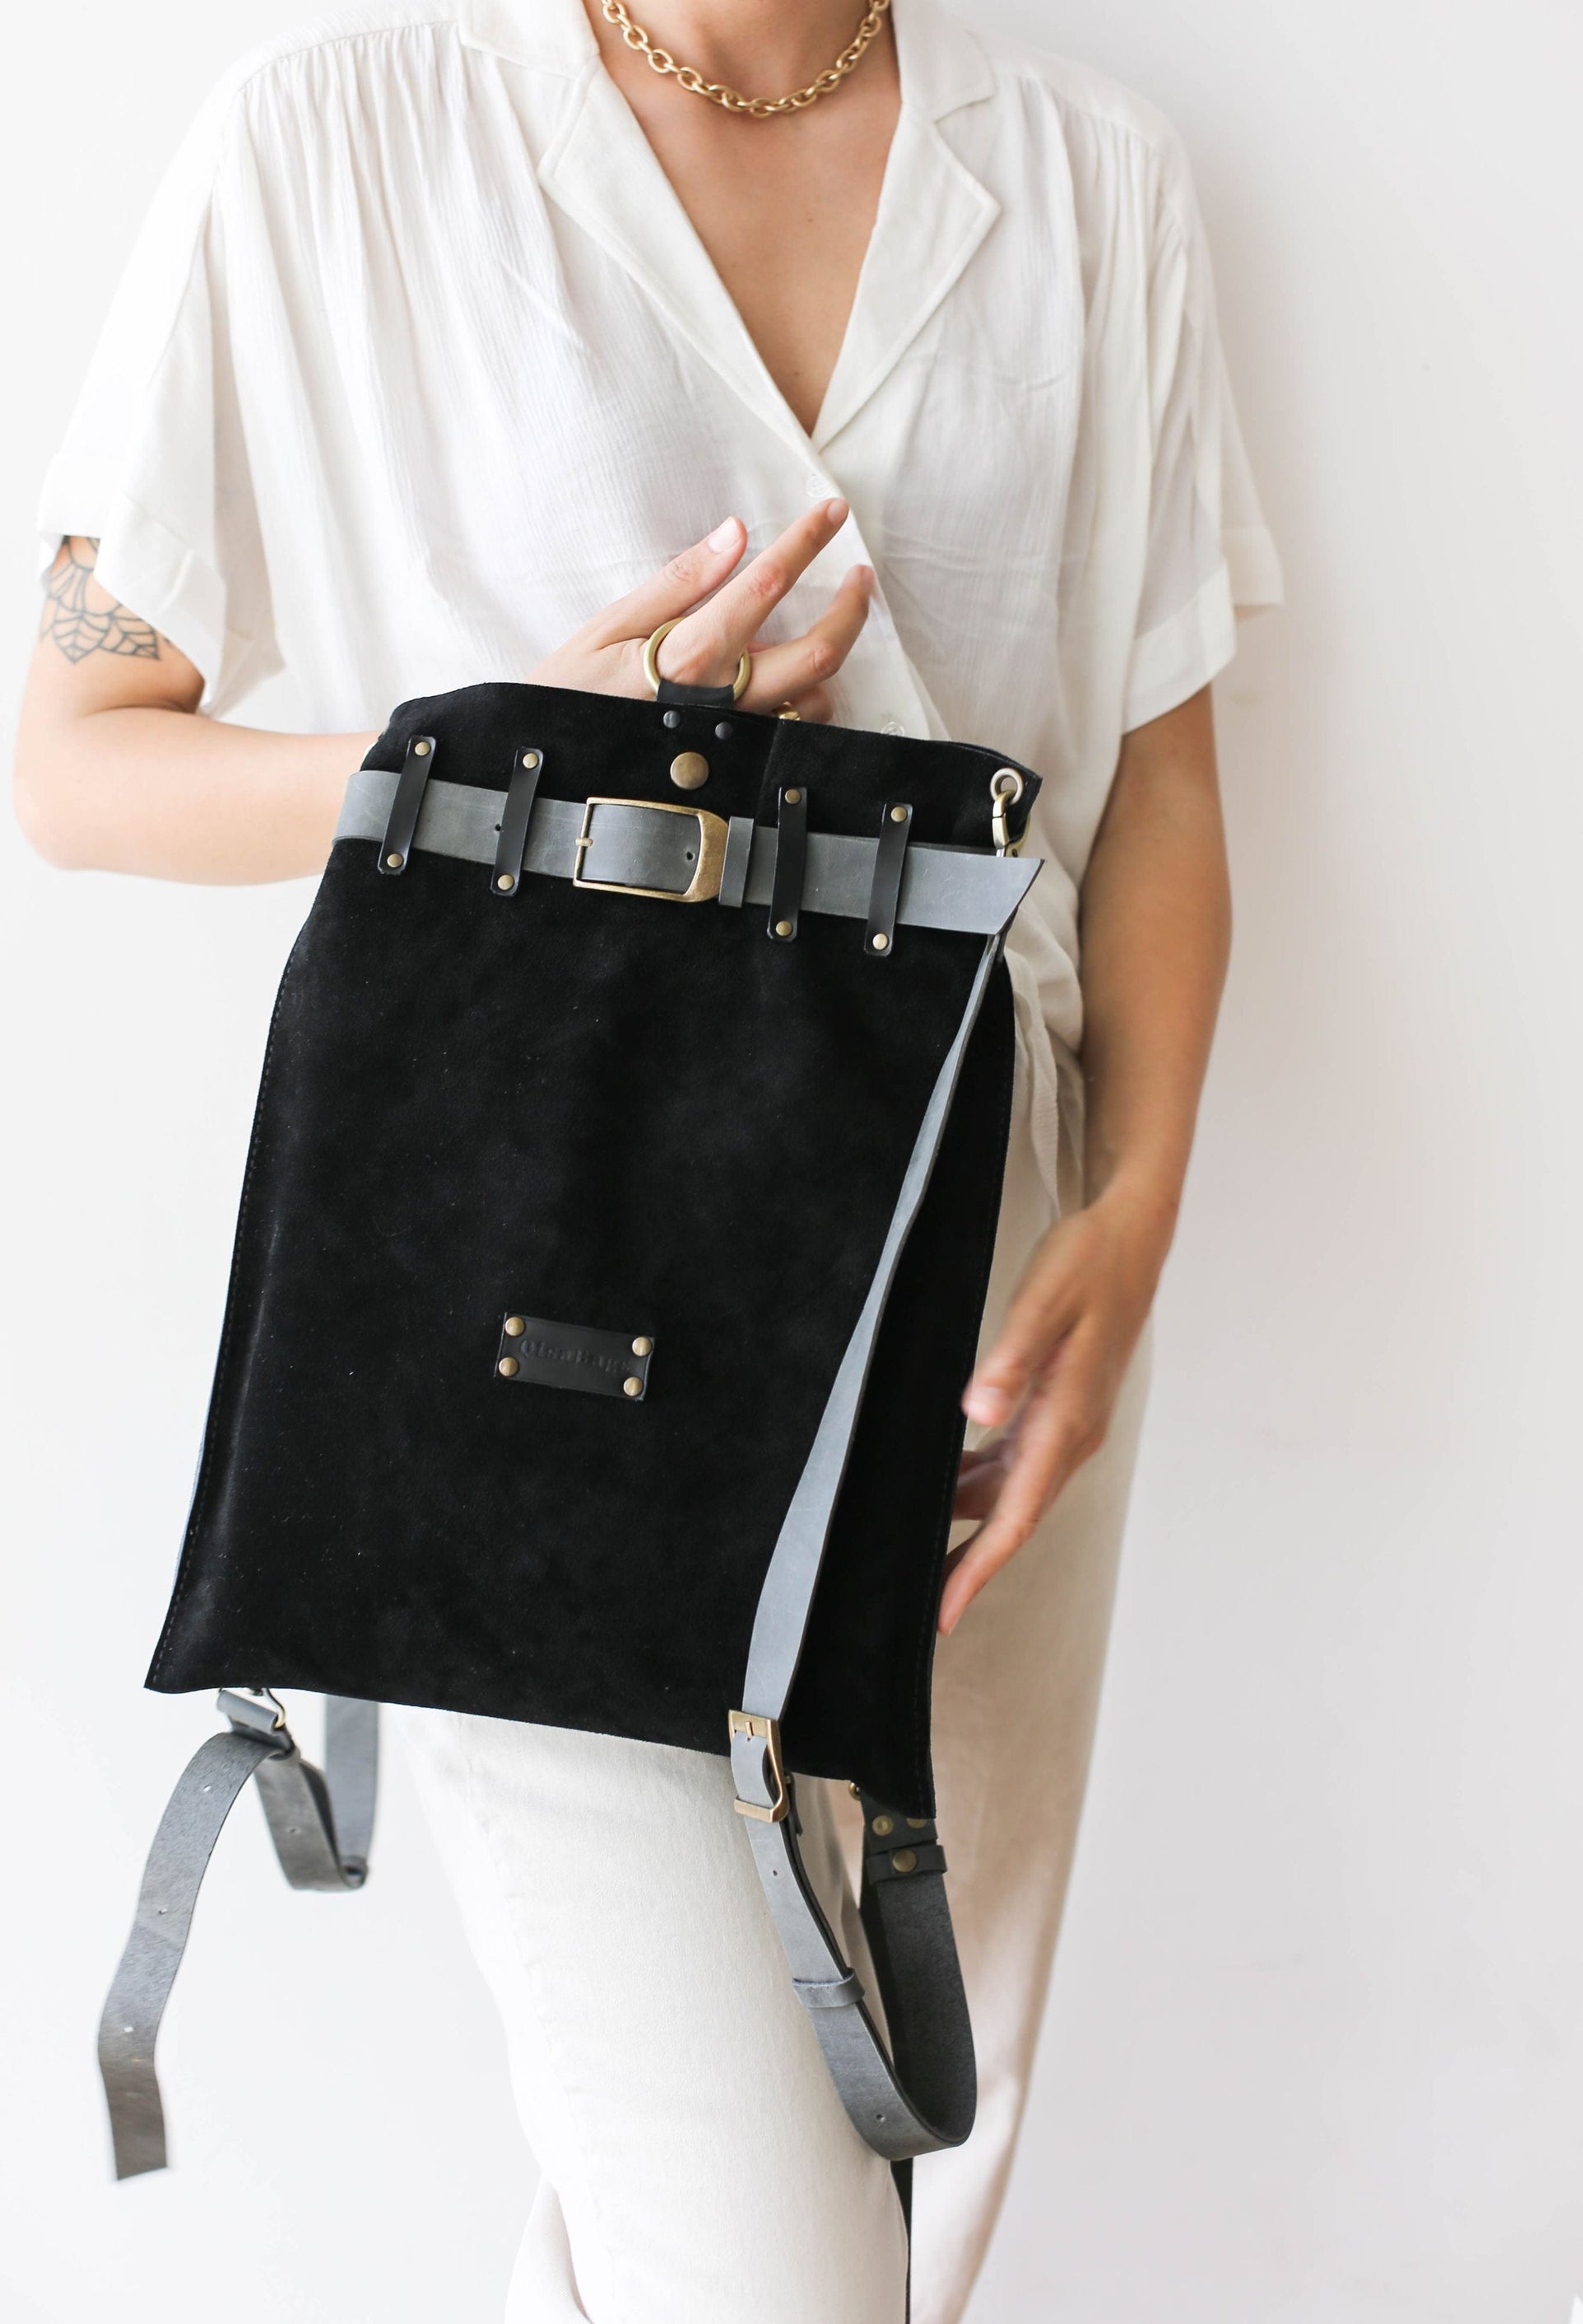 leather backpack purse black